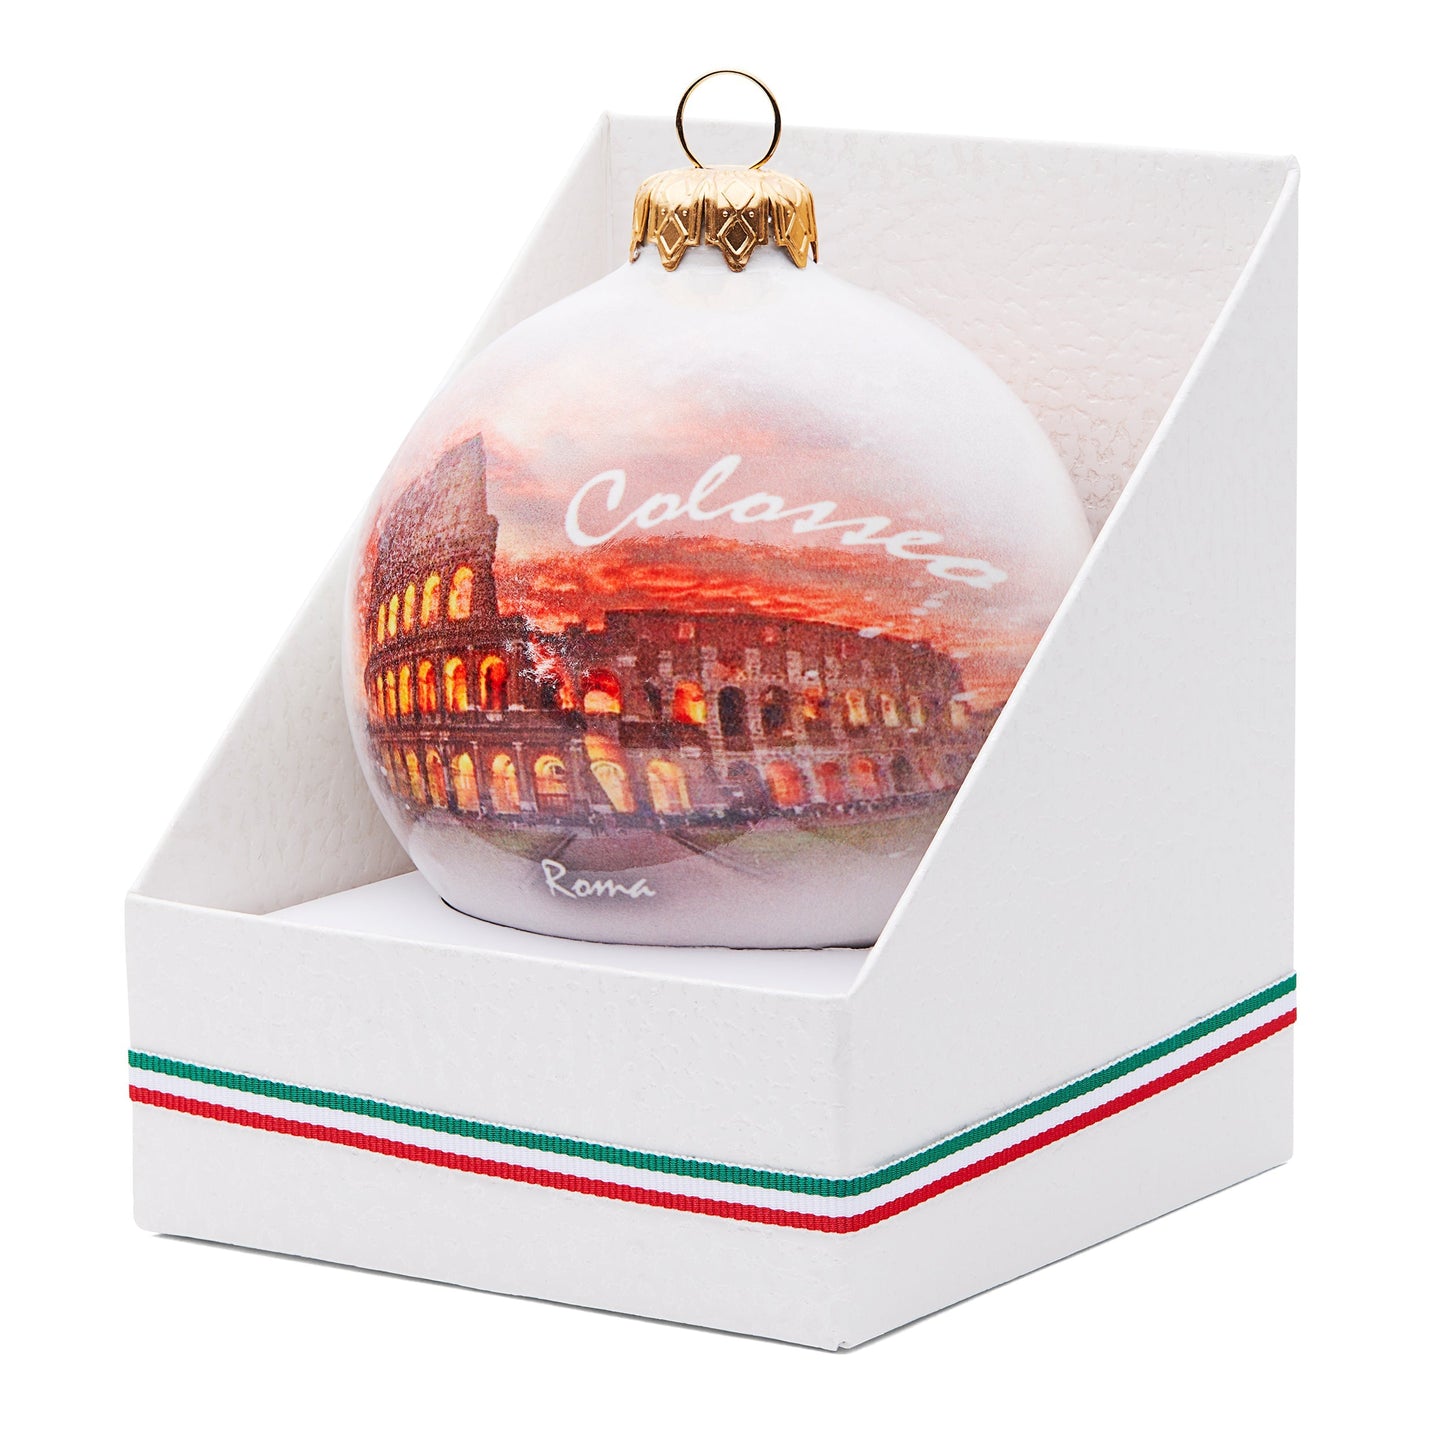 Mondo Cattolico Ceramic Christmas Ball With Coliseum at Sunset